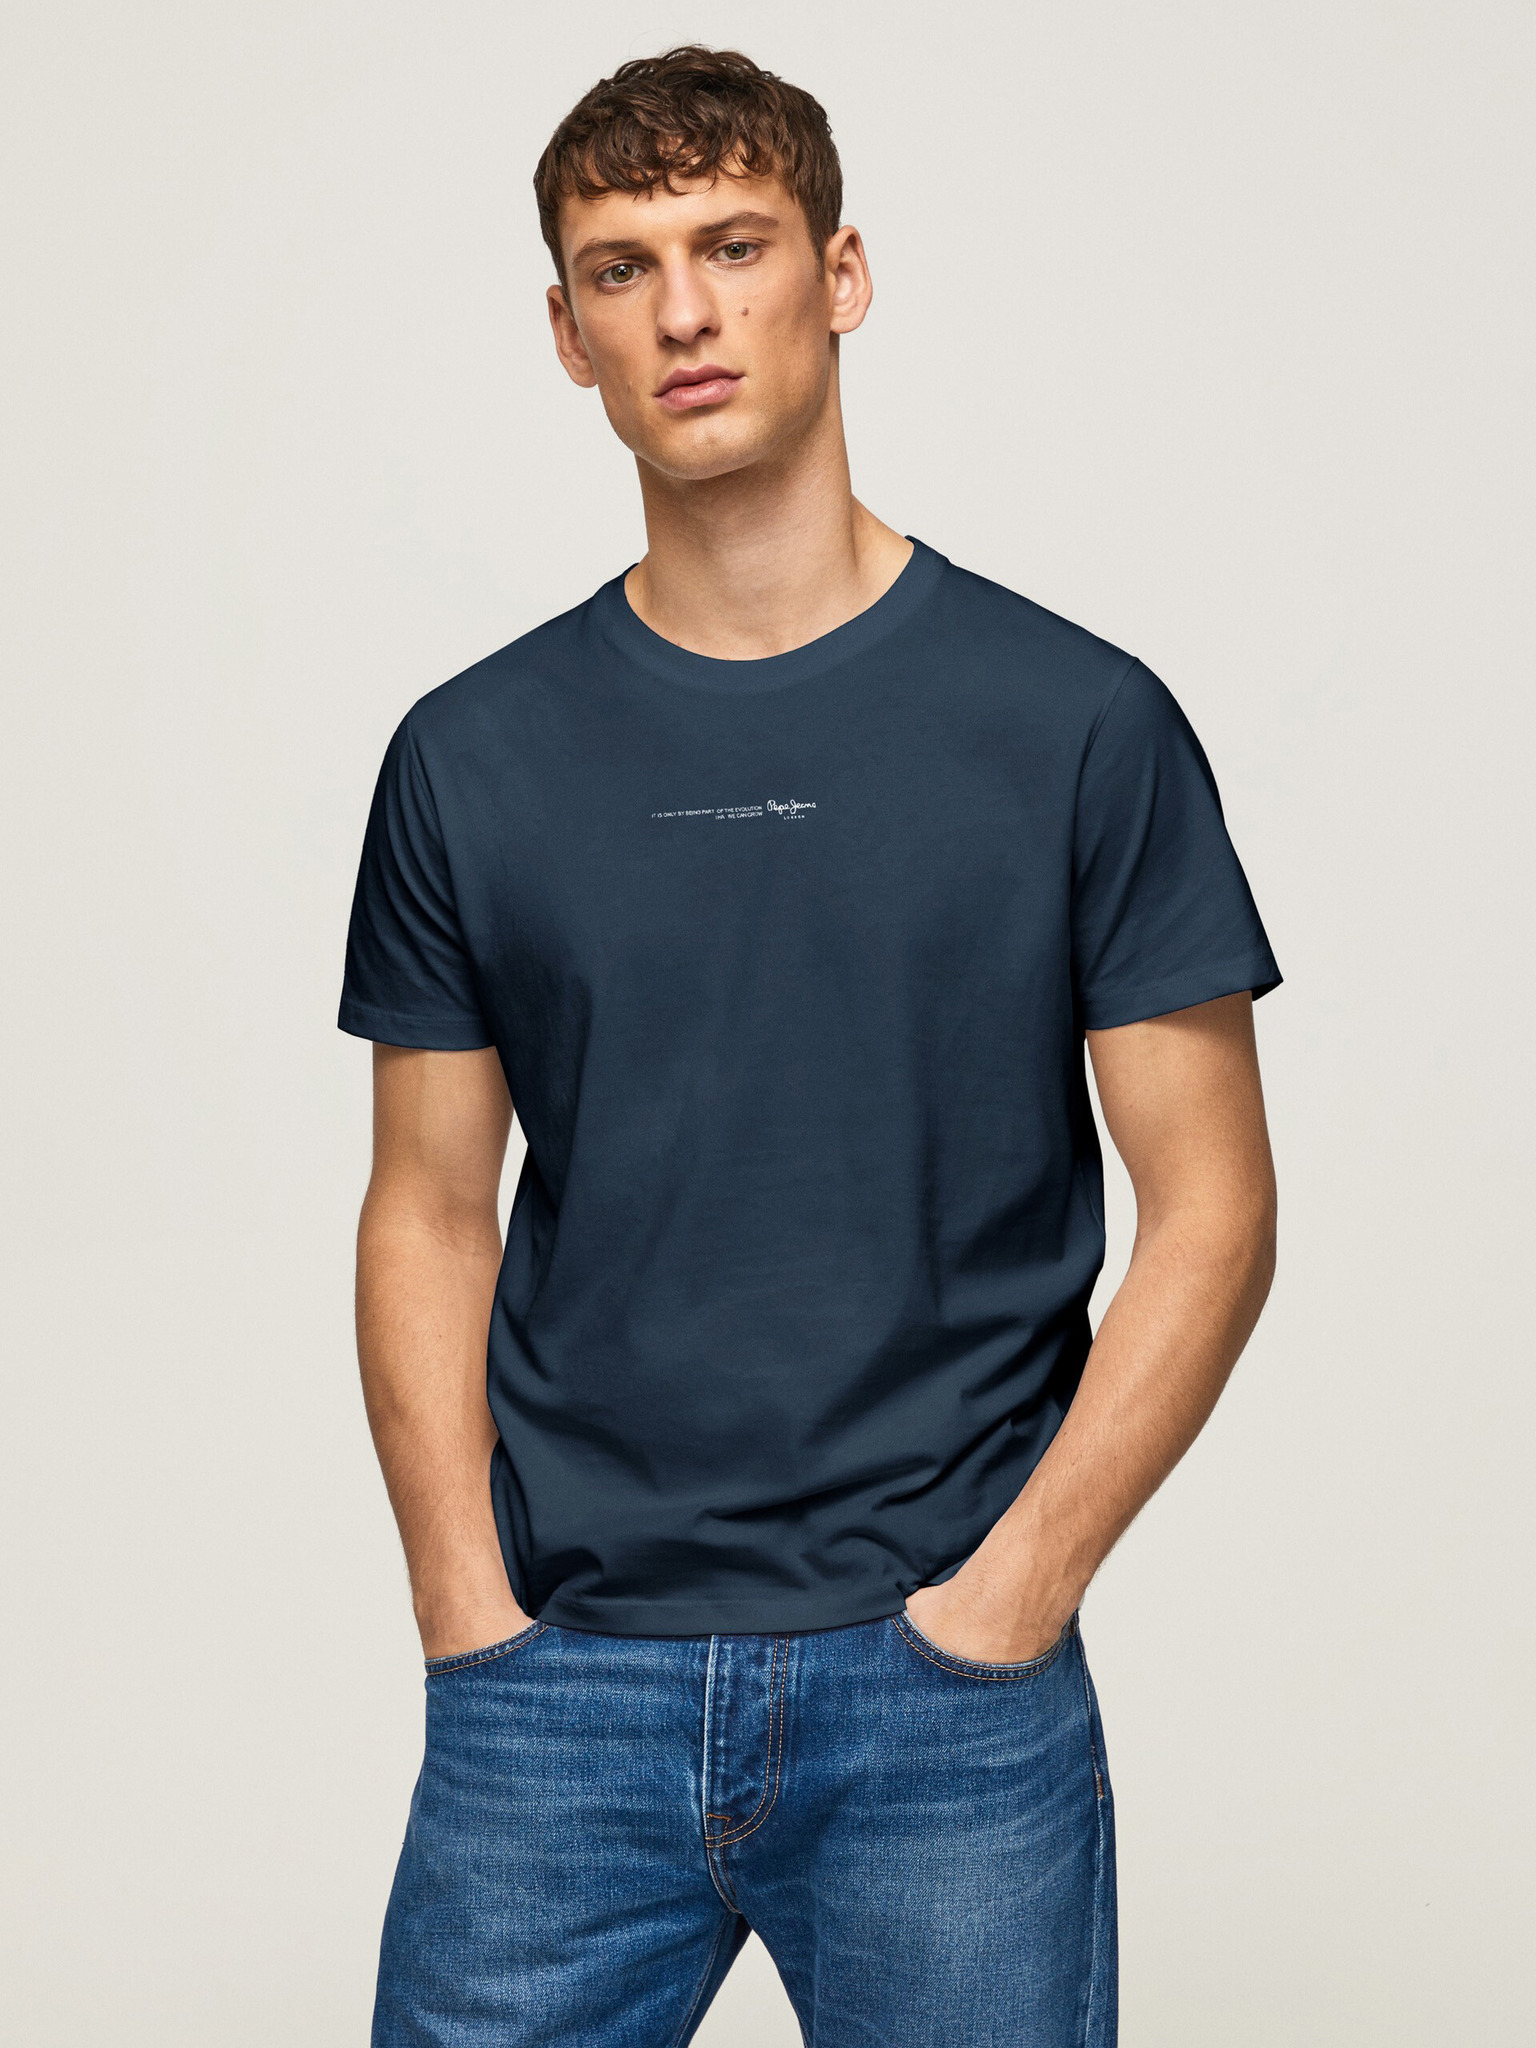 Jeans T-shirt Pepe -